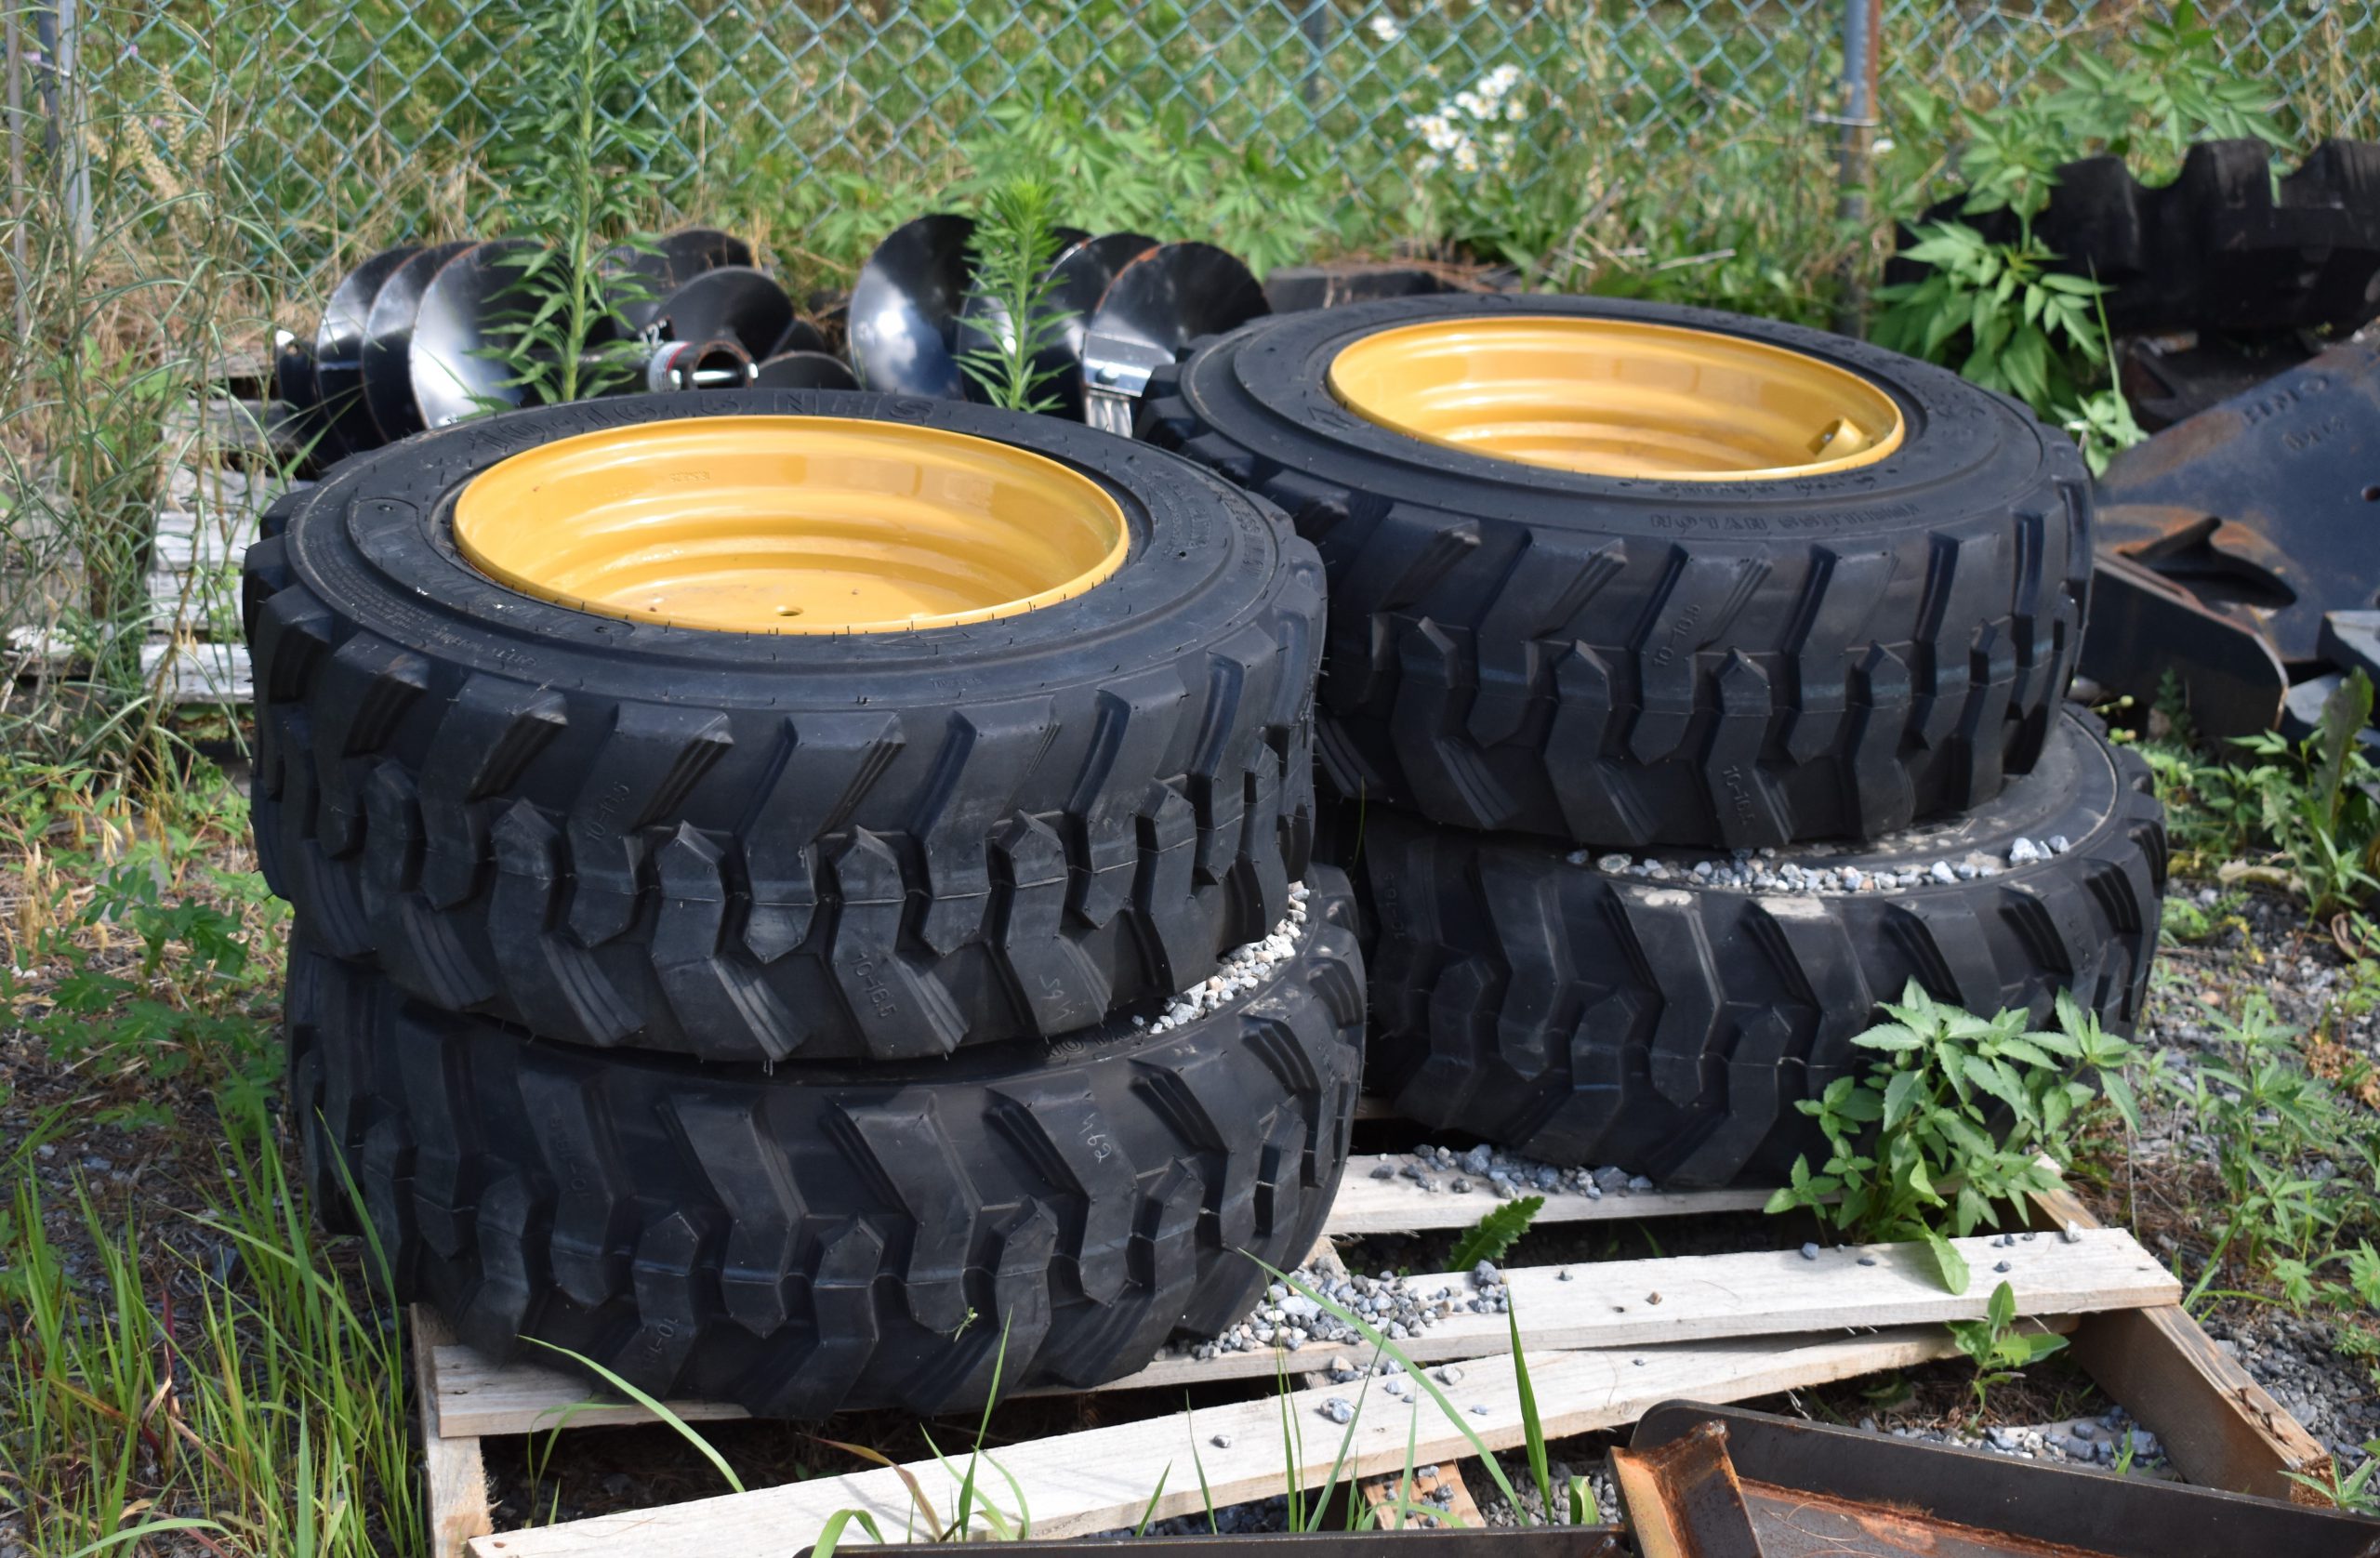 New Skid Steer Rims and Tires-image